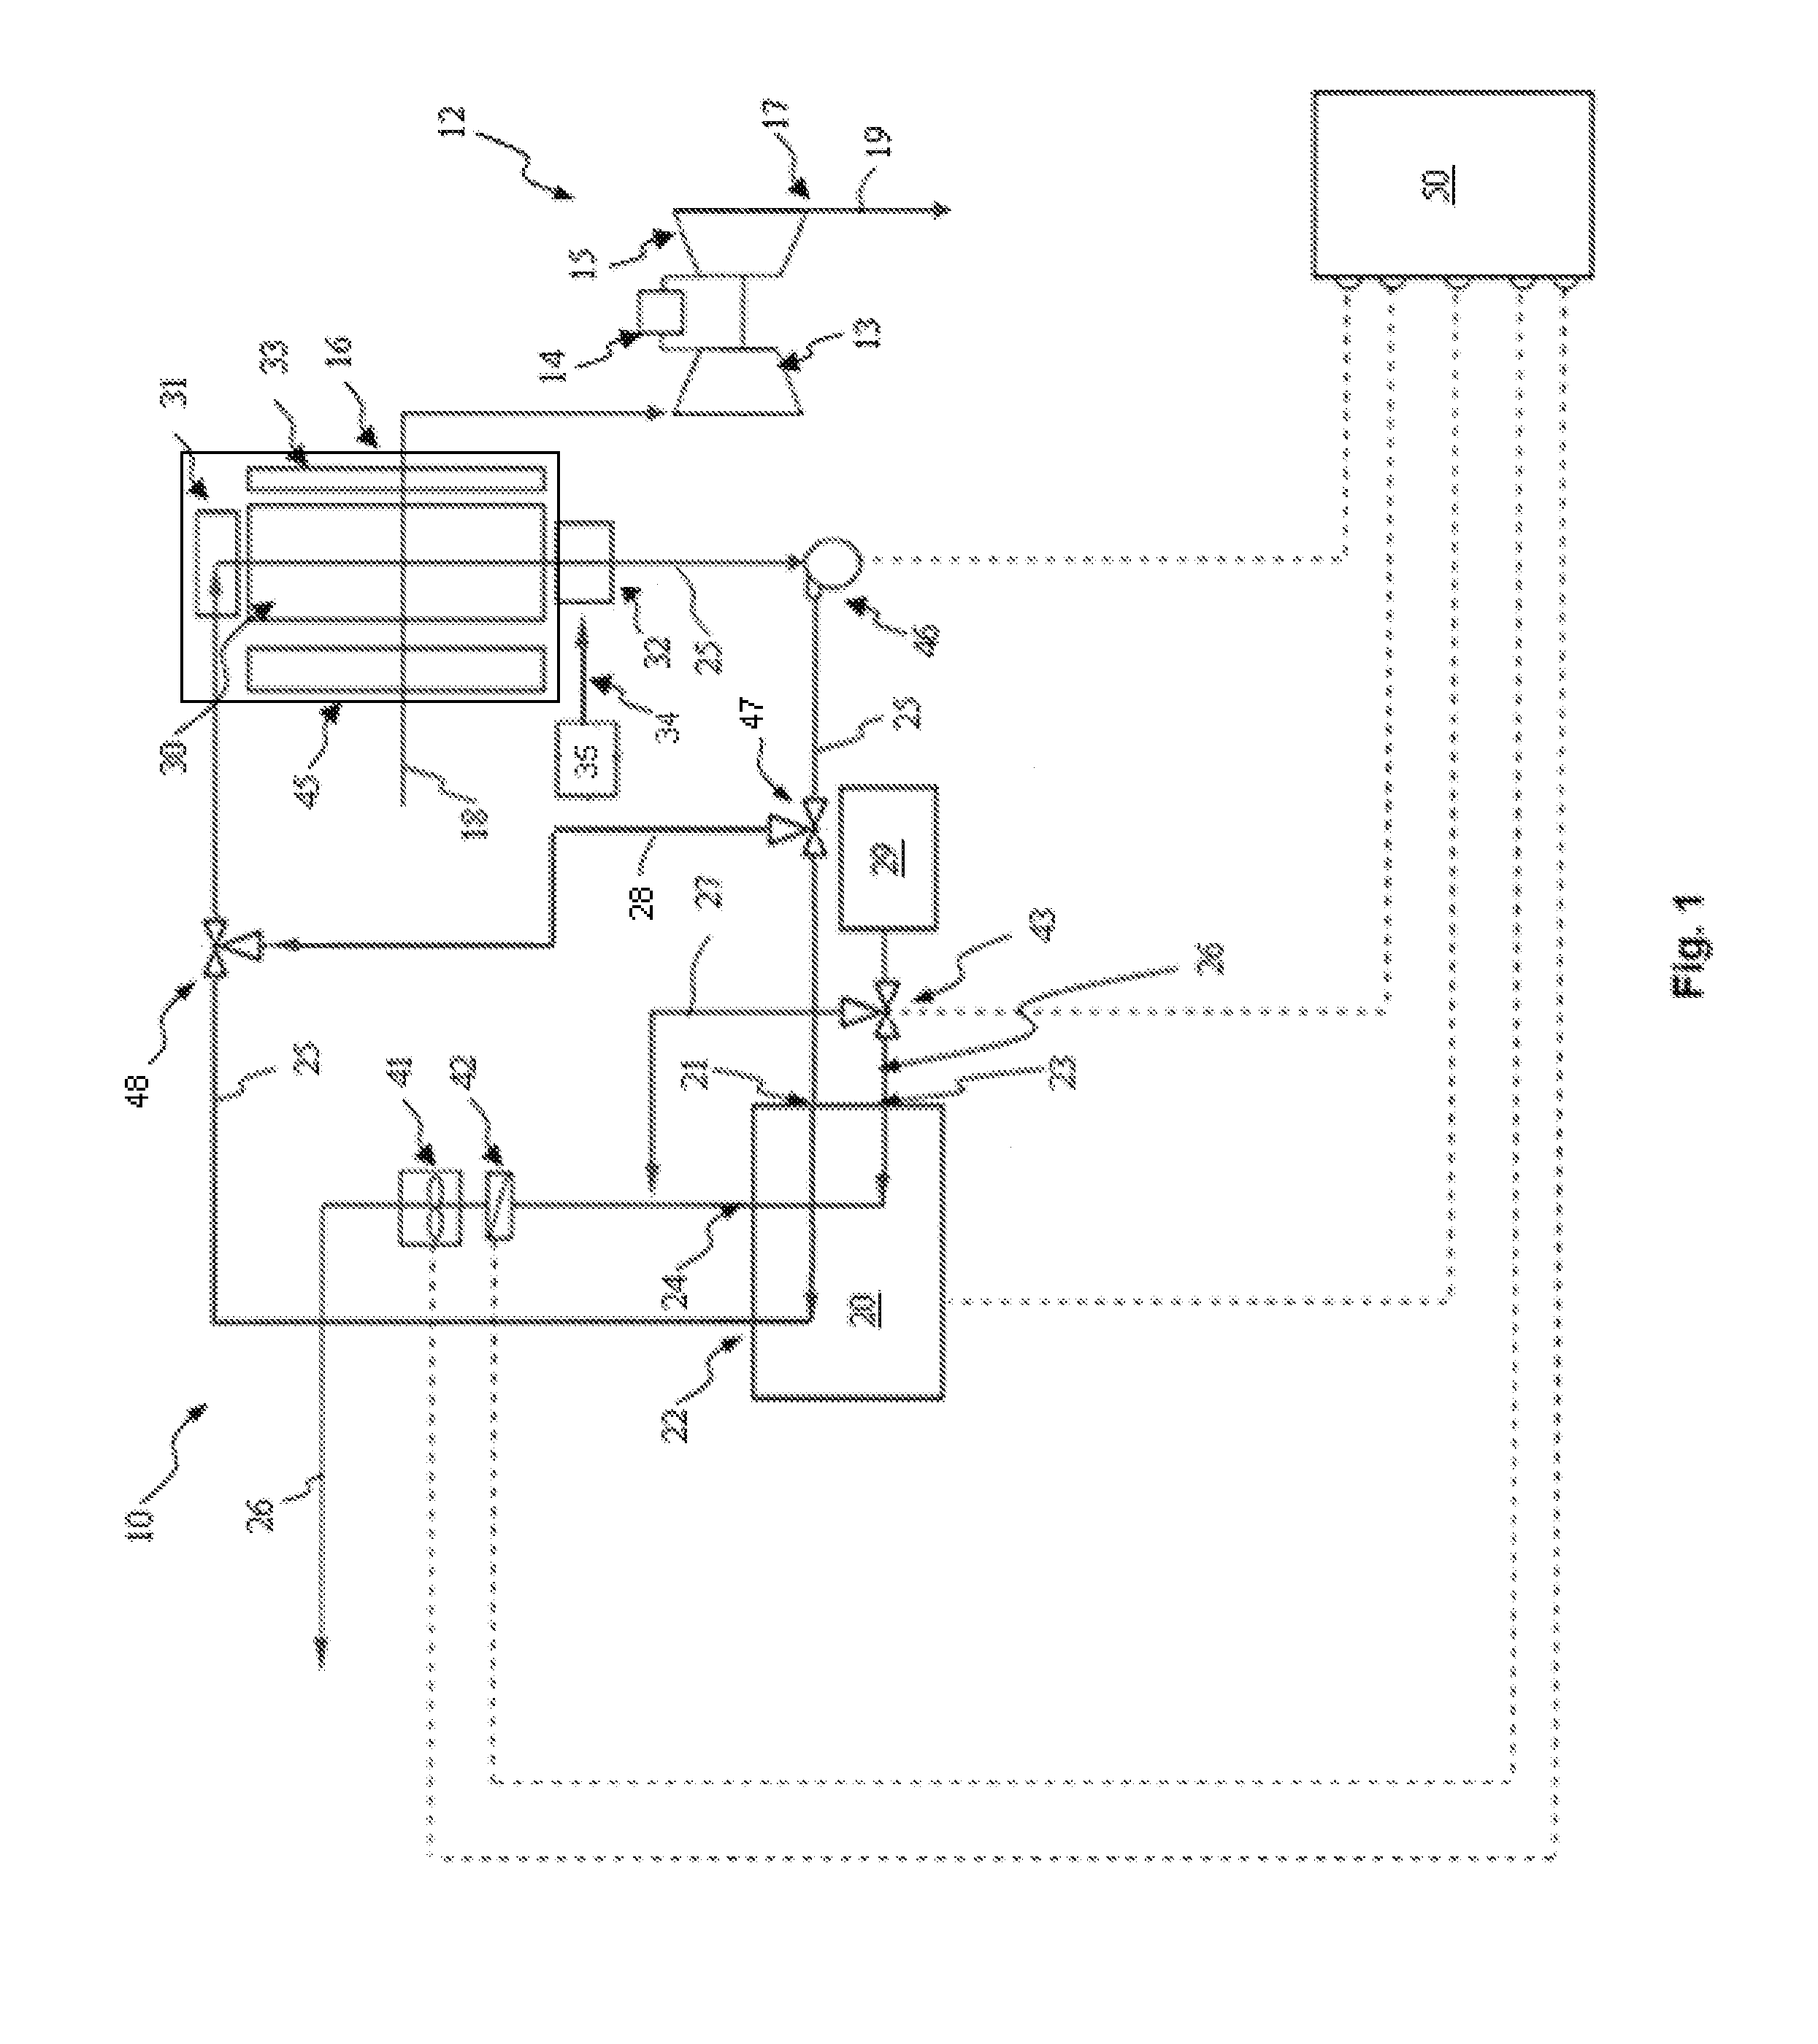 System and method for gas turbine inlet air heating